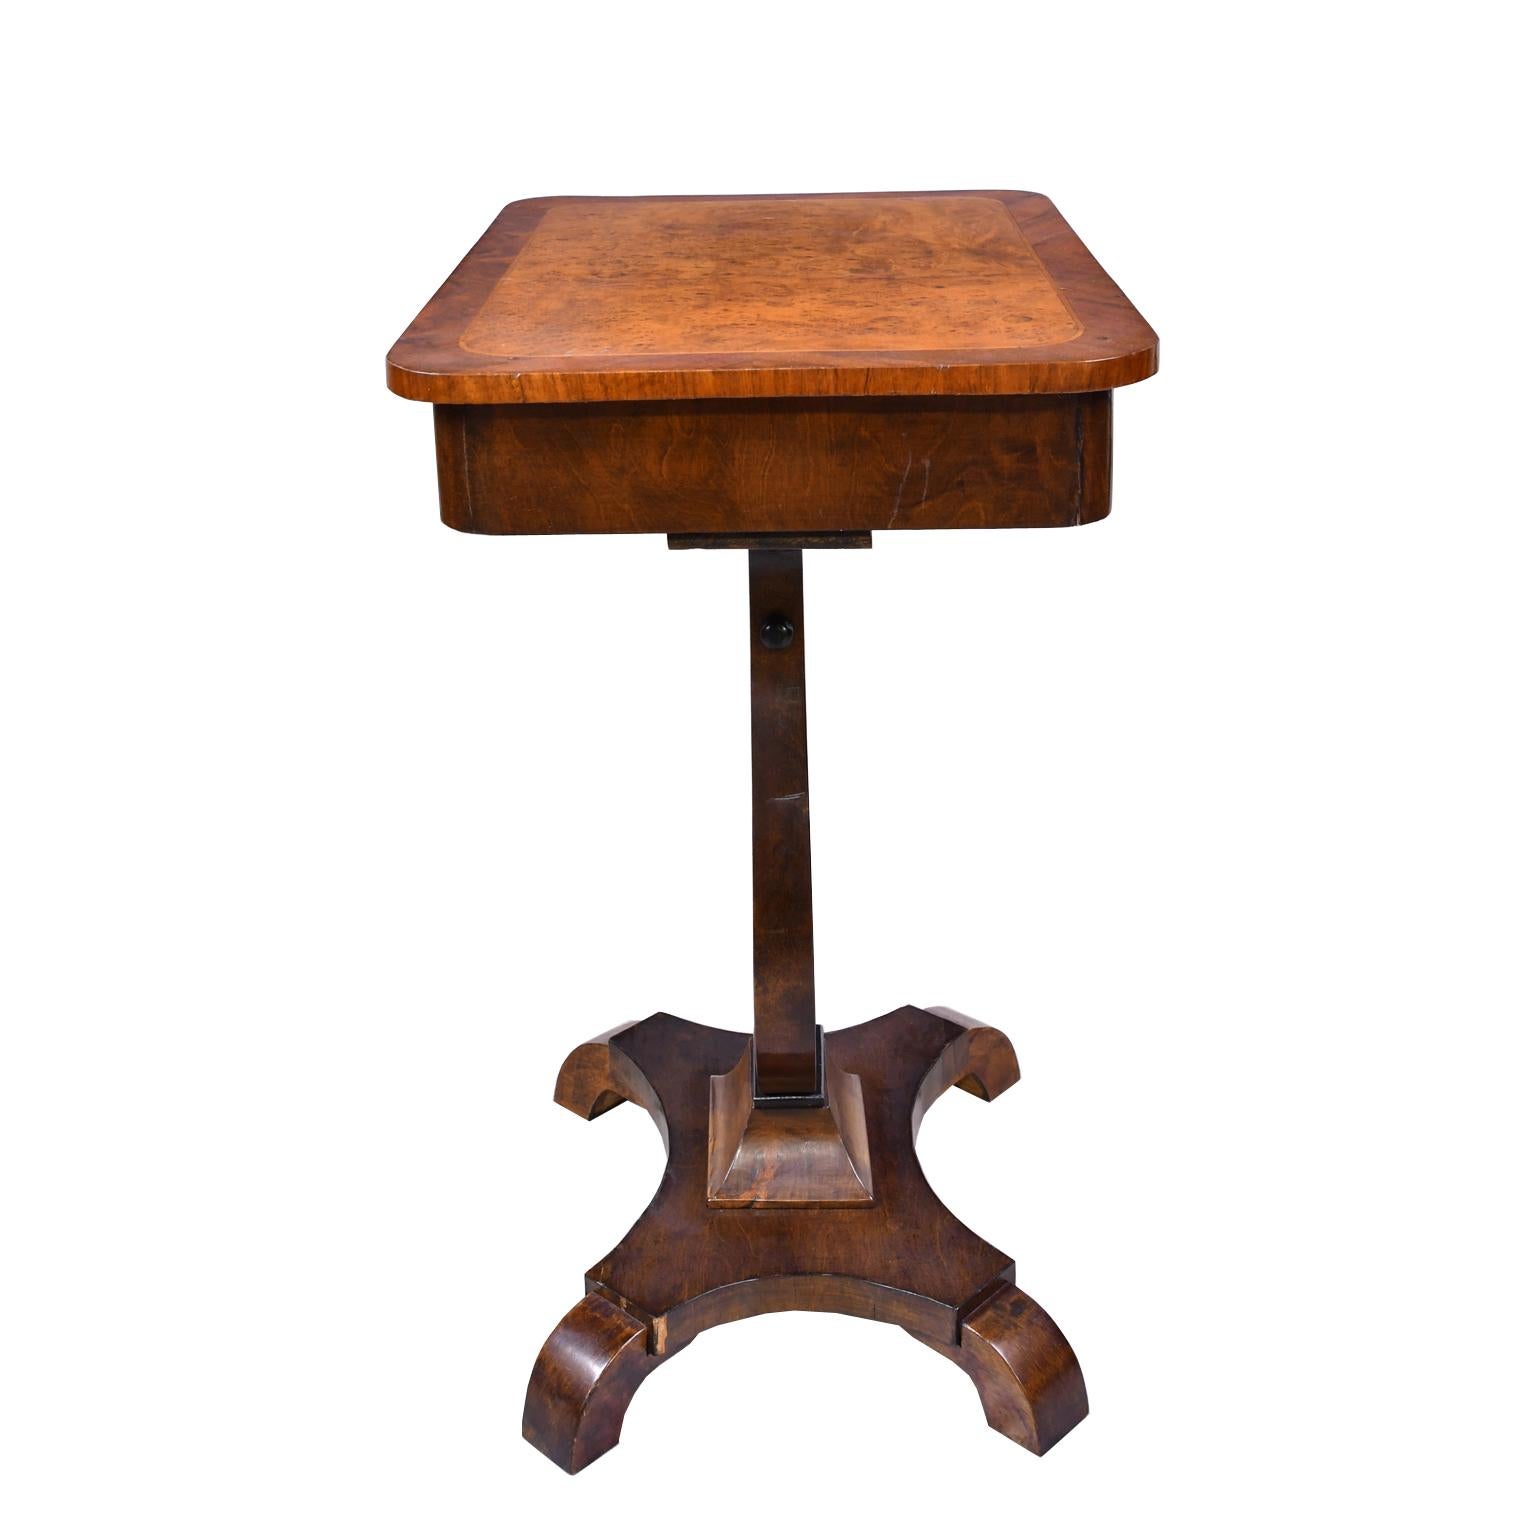 Karl Johan Salon Table in Birchwood with Lyre Pedestal, Sweden, circa 1820 In Good Condition For Sale In Miami, FL